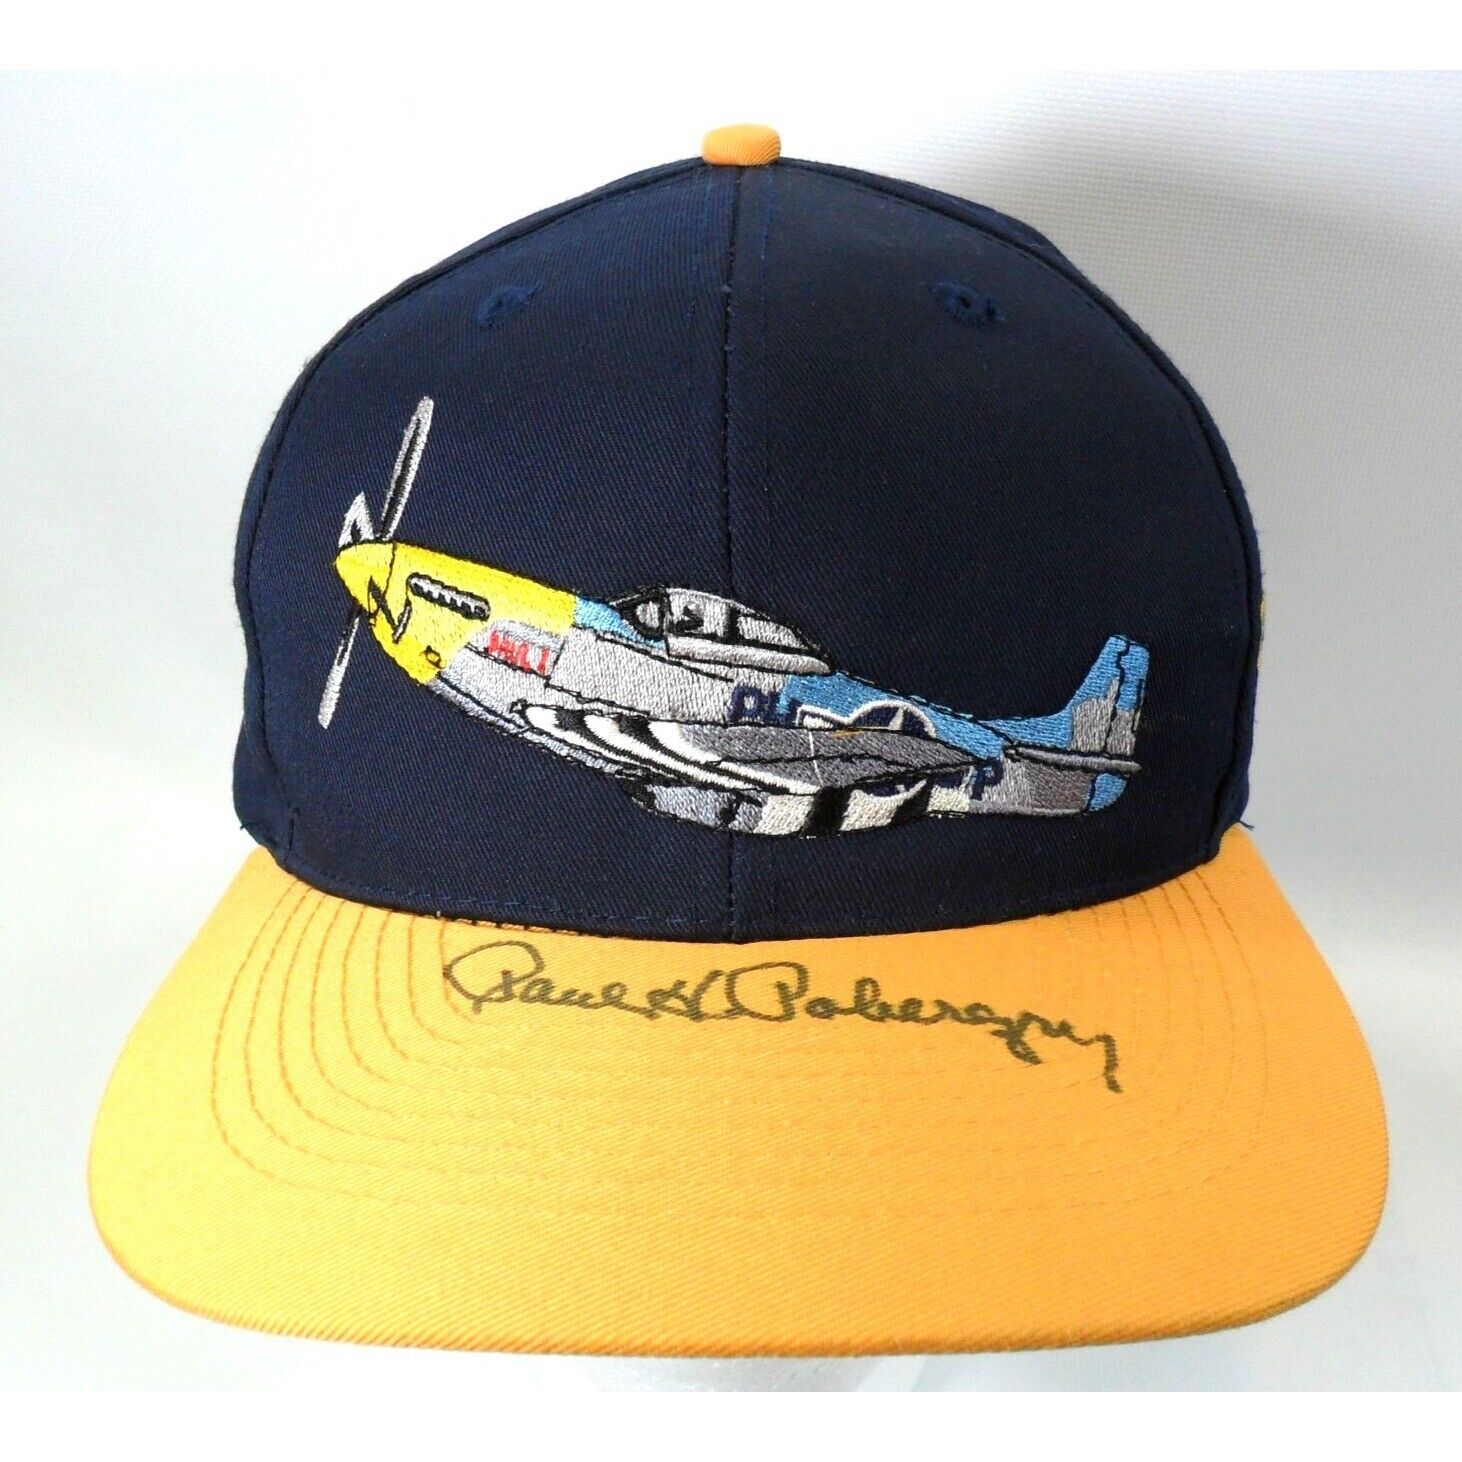 VINTAGE P-51 Mustang Paul 1 Col. Paul Poberezny, Signed Autograph Cap Hat NEW